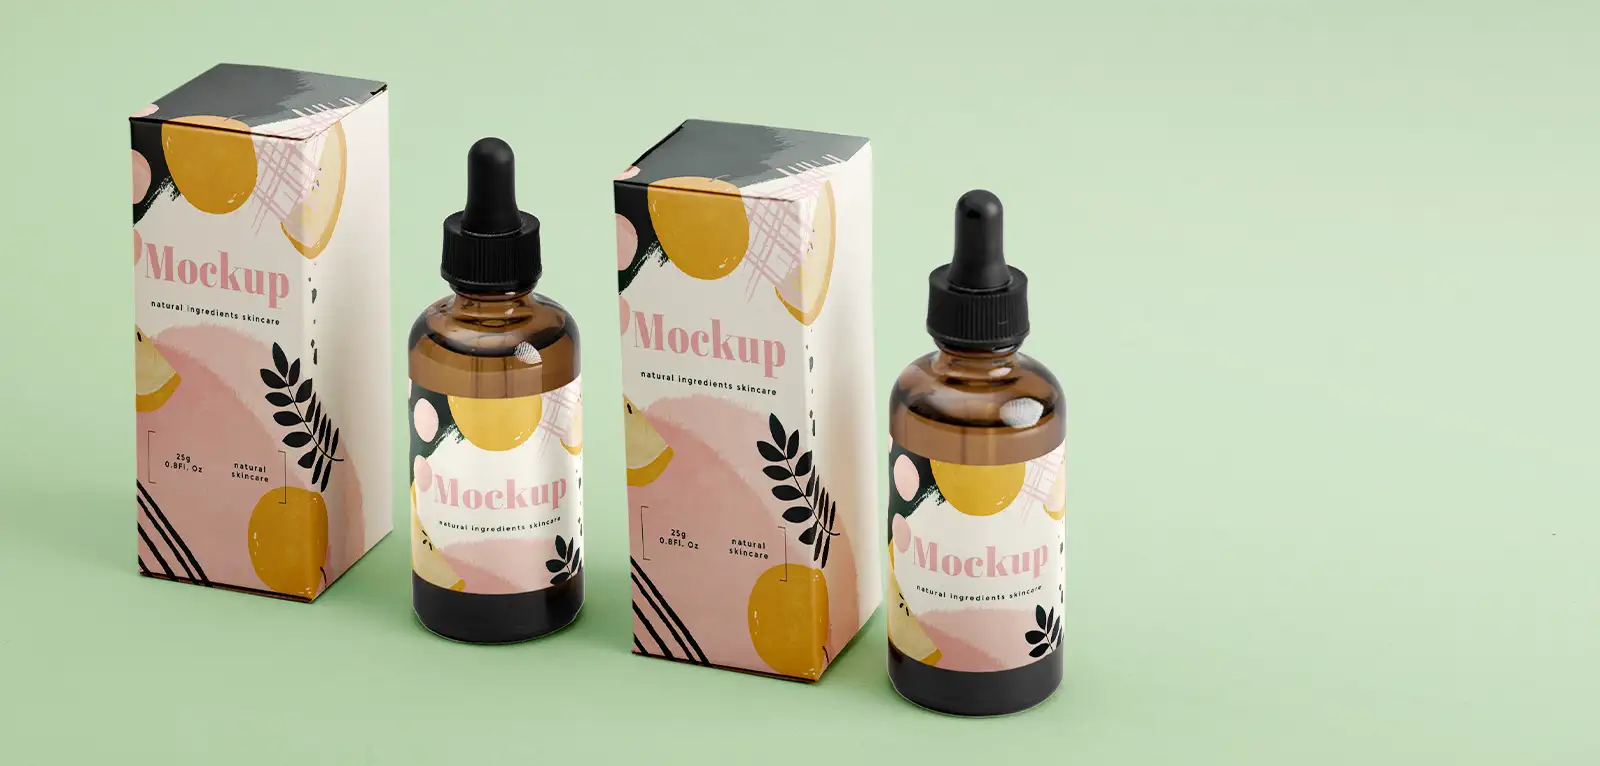 A skincare product with clever, colorful packaging of pink, yellow, and black elements